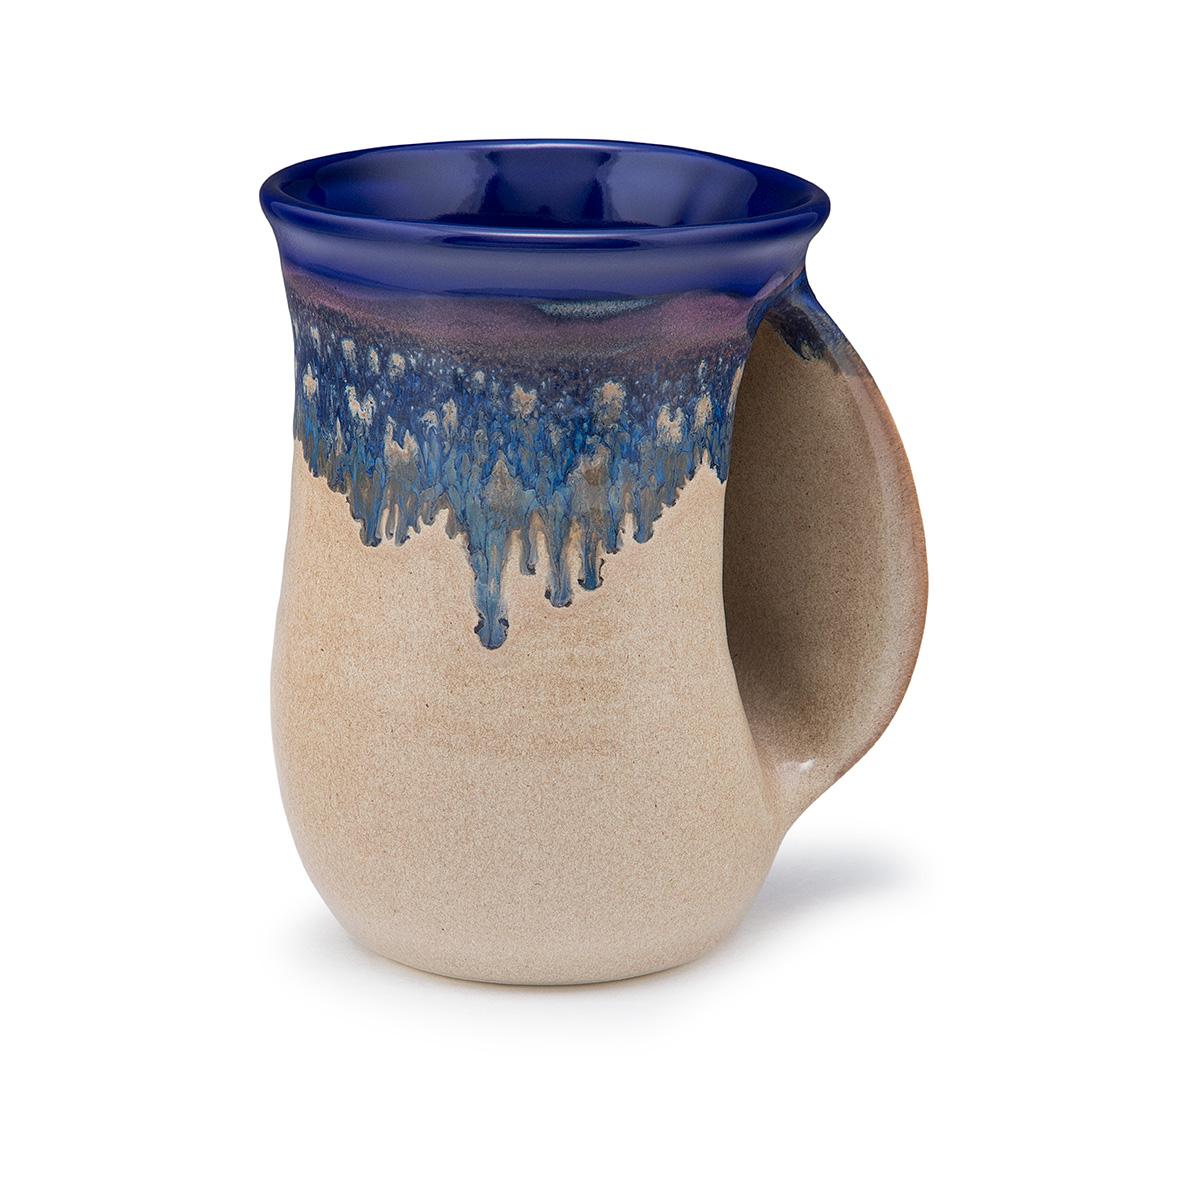 The 11 Best Coffee Mugs to Warm Up Your Hands and Heart